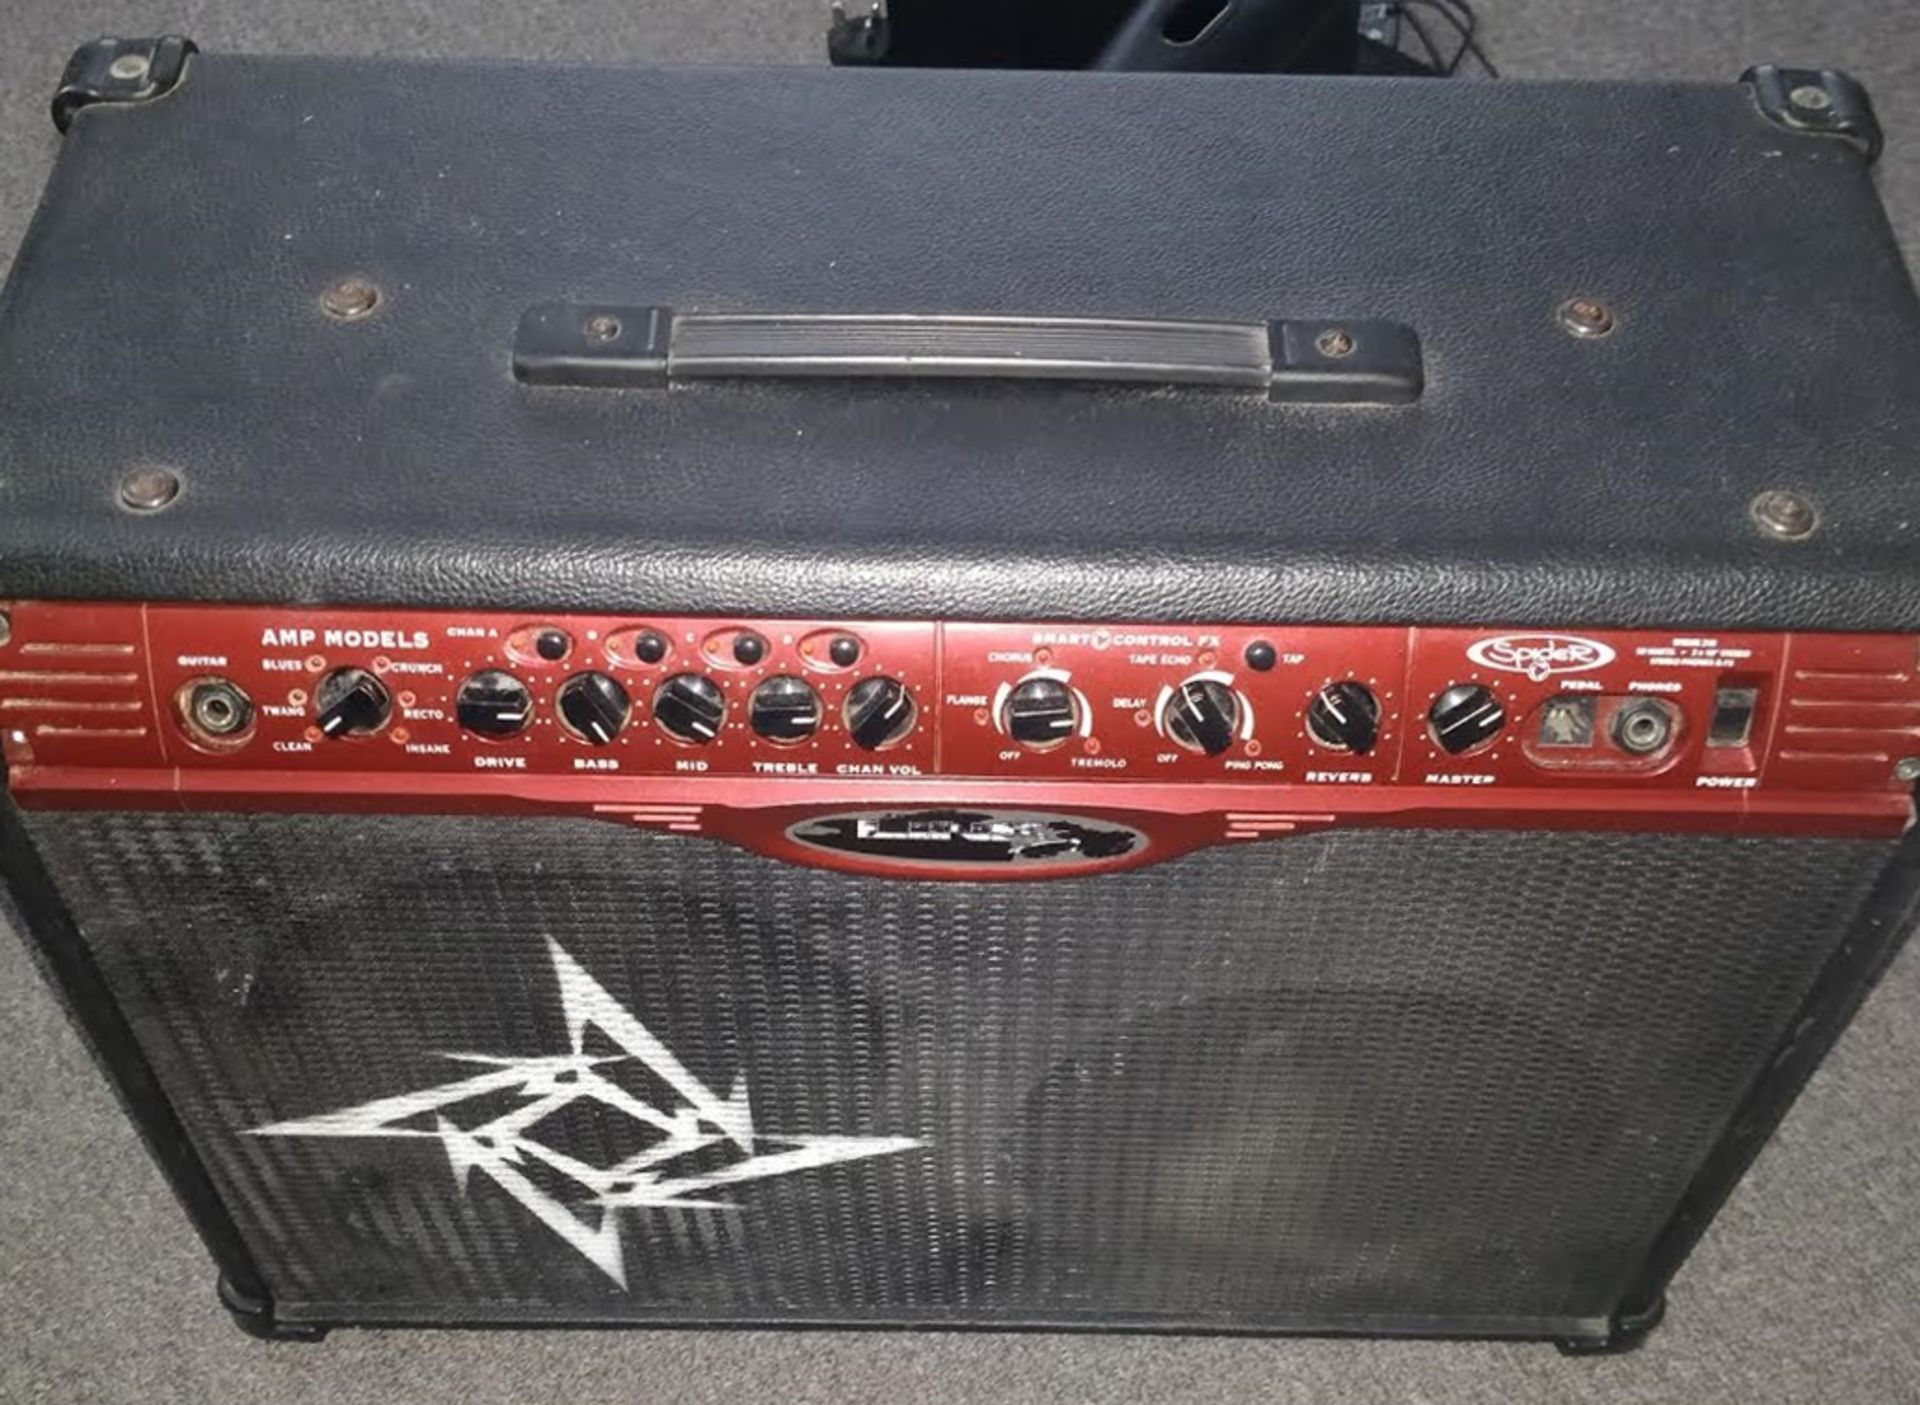 1 x Line 6 Spider Guitar Amplifier With Amp Modelling - Includes Cables - Ref: WH1 Pal1 - CL010 - - Image 2 of 4